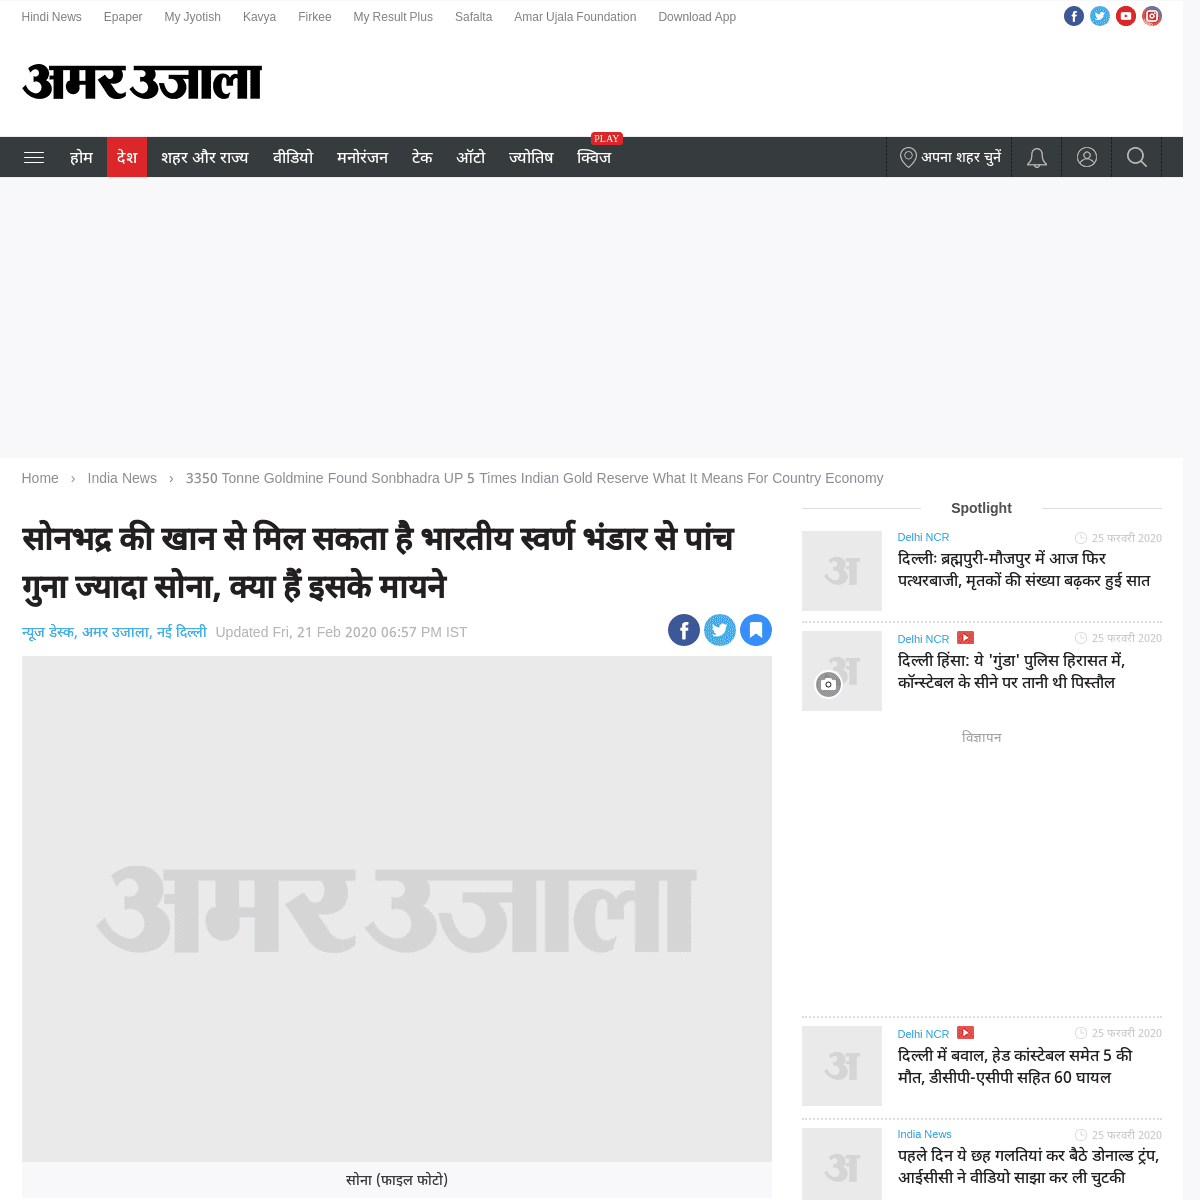 A complete backup of www.amarujala.com/india-news/3350-tonne-goldmine-found-sonbhadra-up-5-times-indian-gold-reserve-what-it-mea